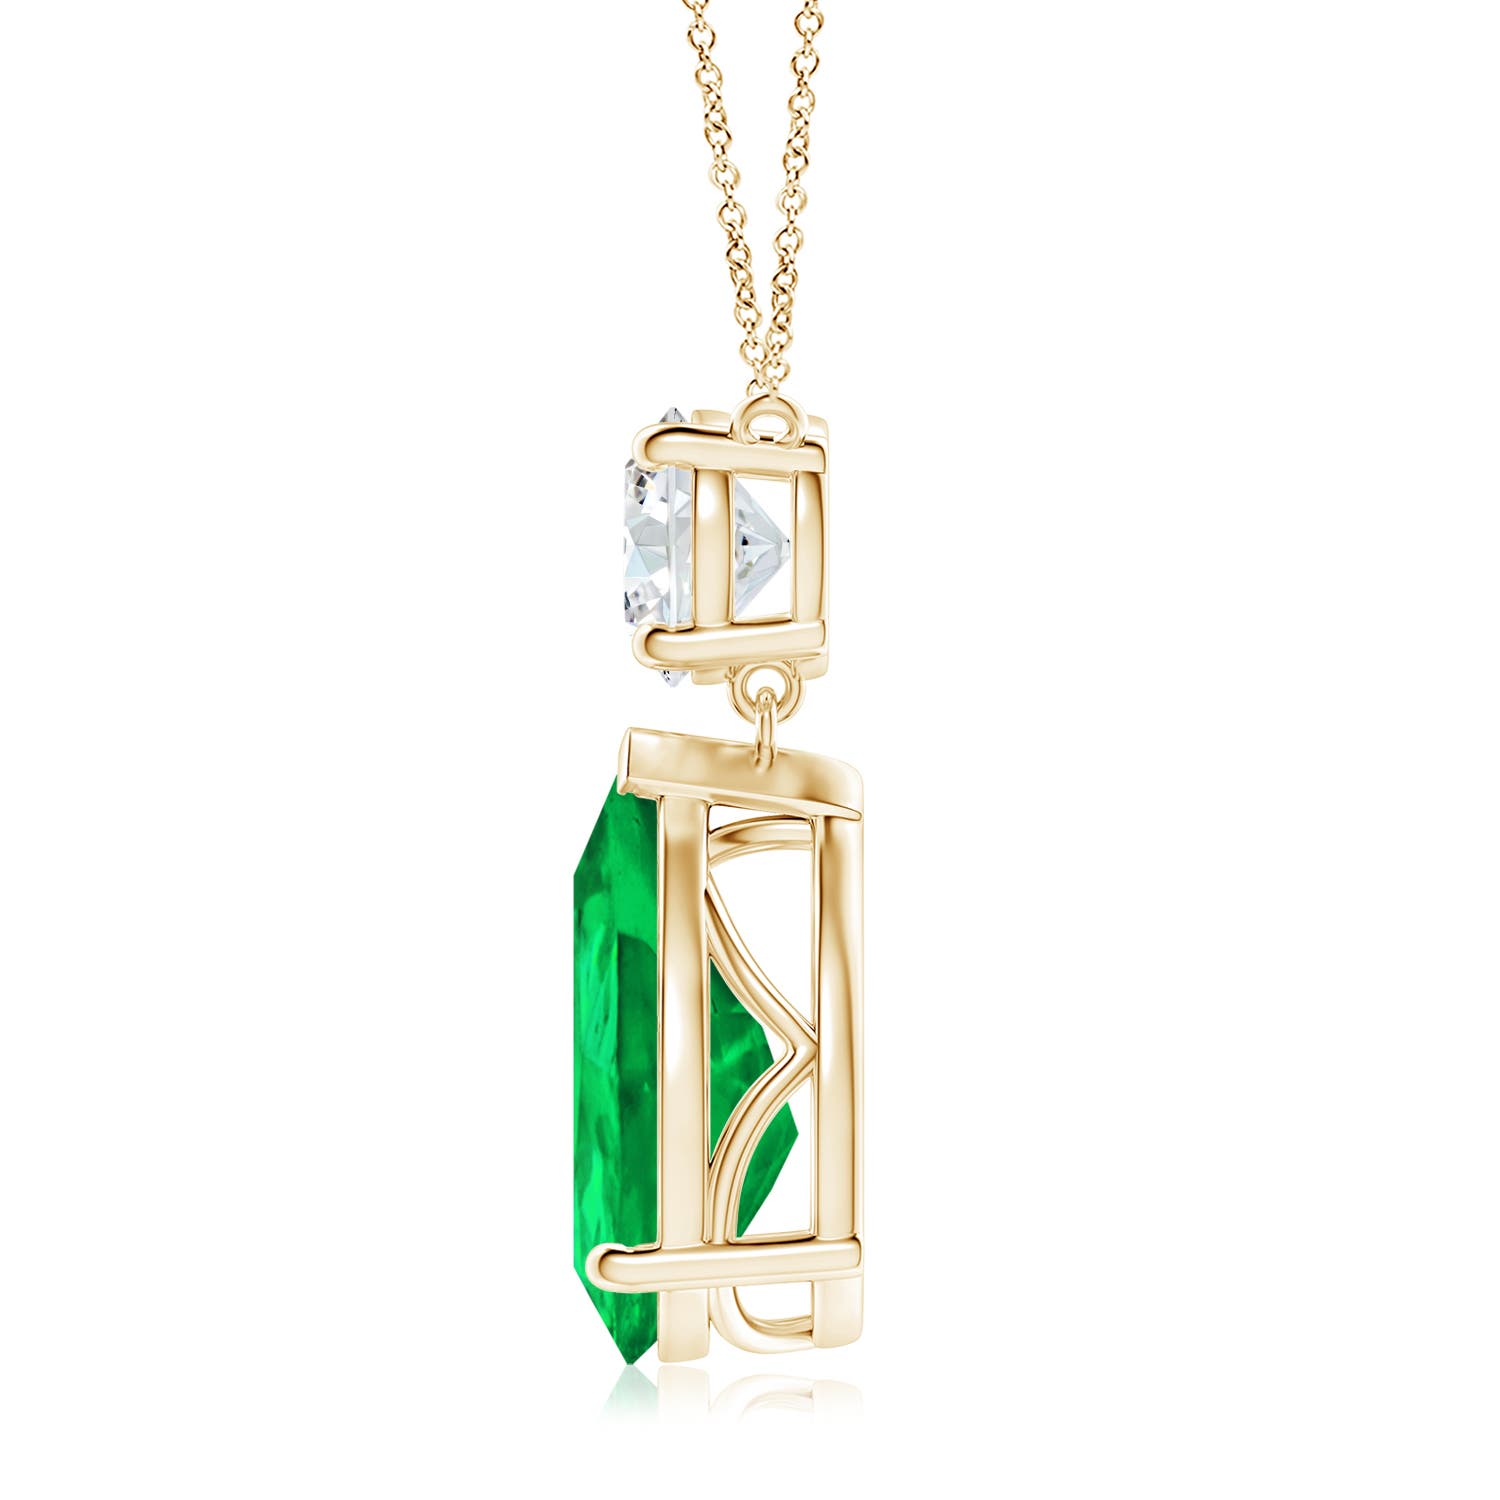 AAA - Emerald / 7.6 CT / 18 KT Yellow Gold